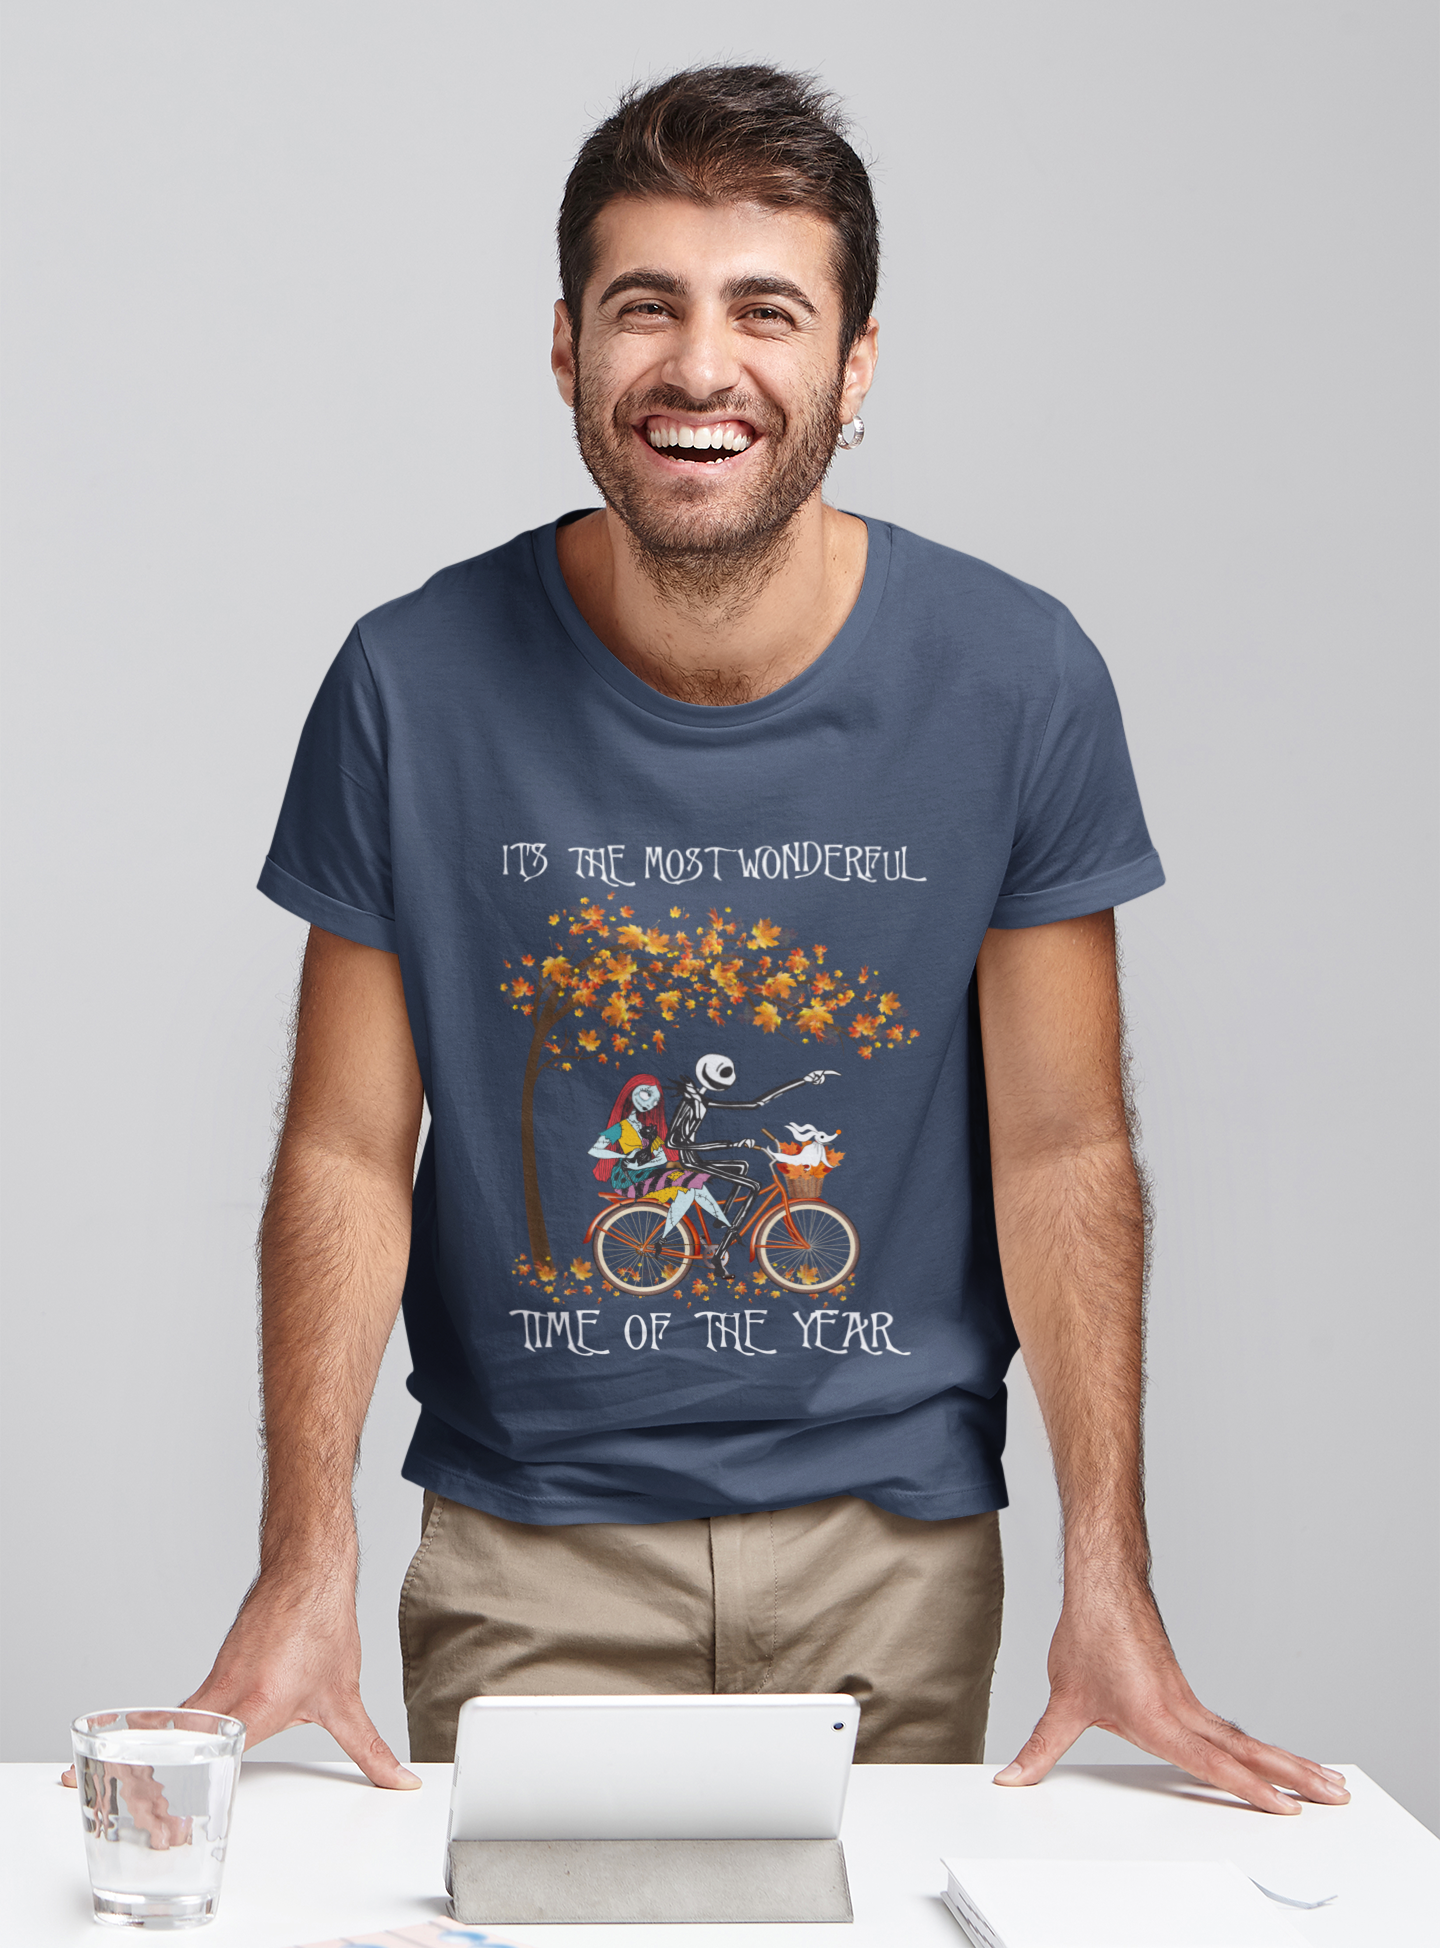 Nightmare Before Christmas T Shirt, Its The Most Wonderful Time Of The Year Tshirt, Jack Skellington Sally T Shirt